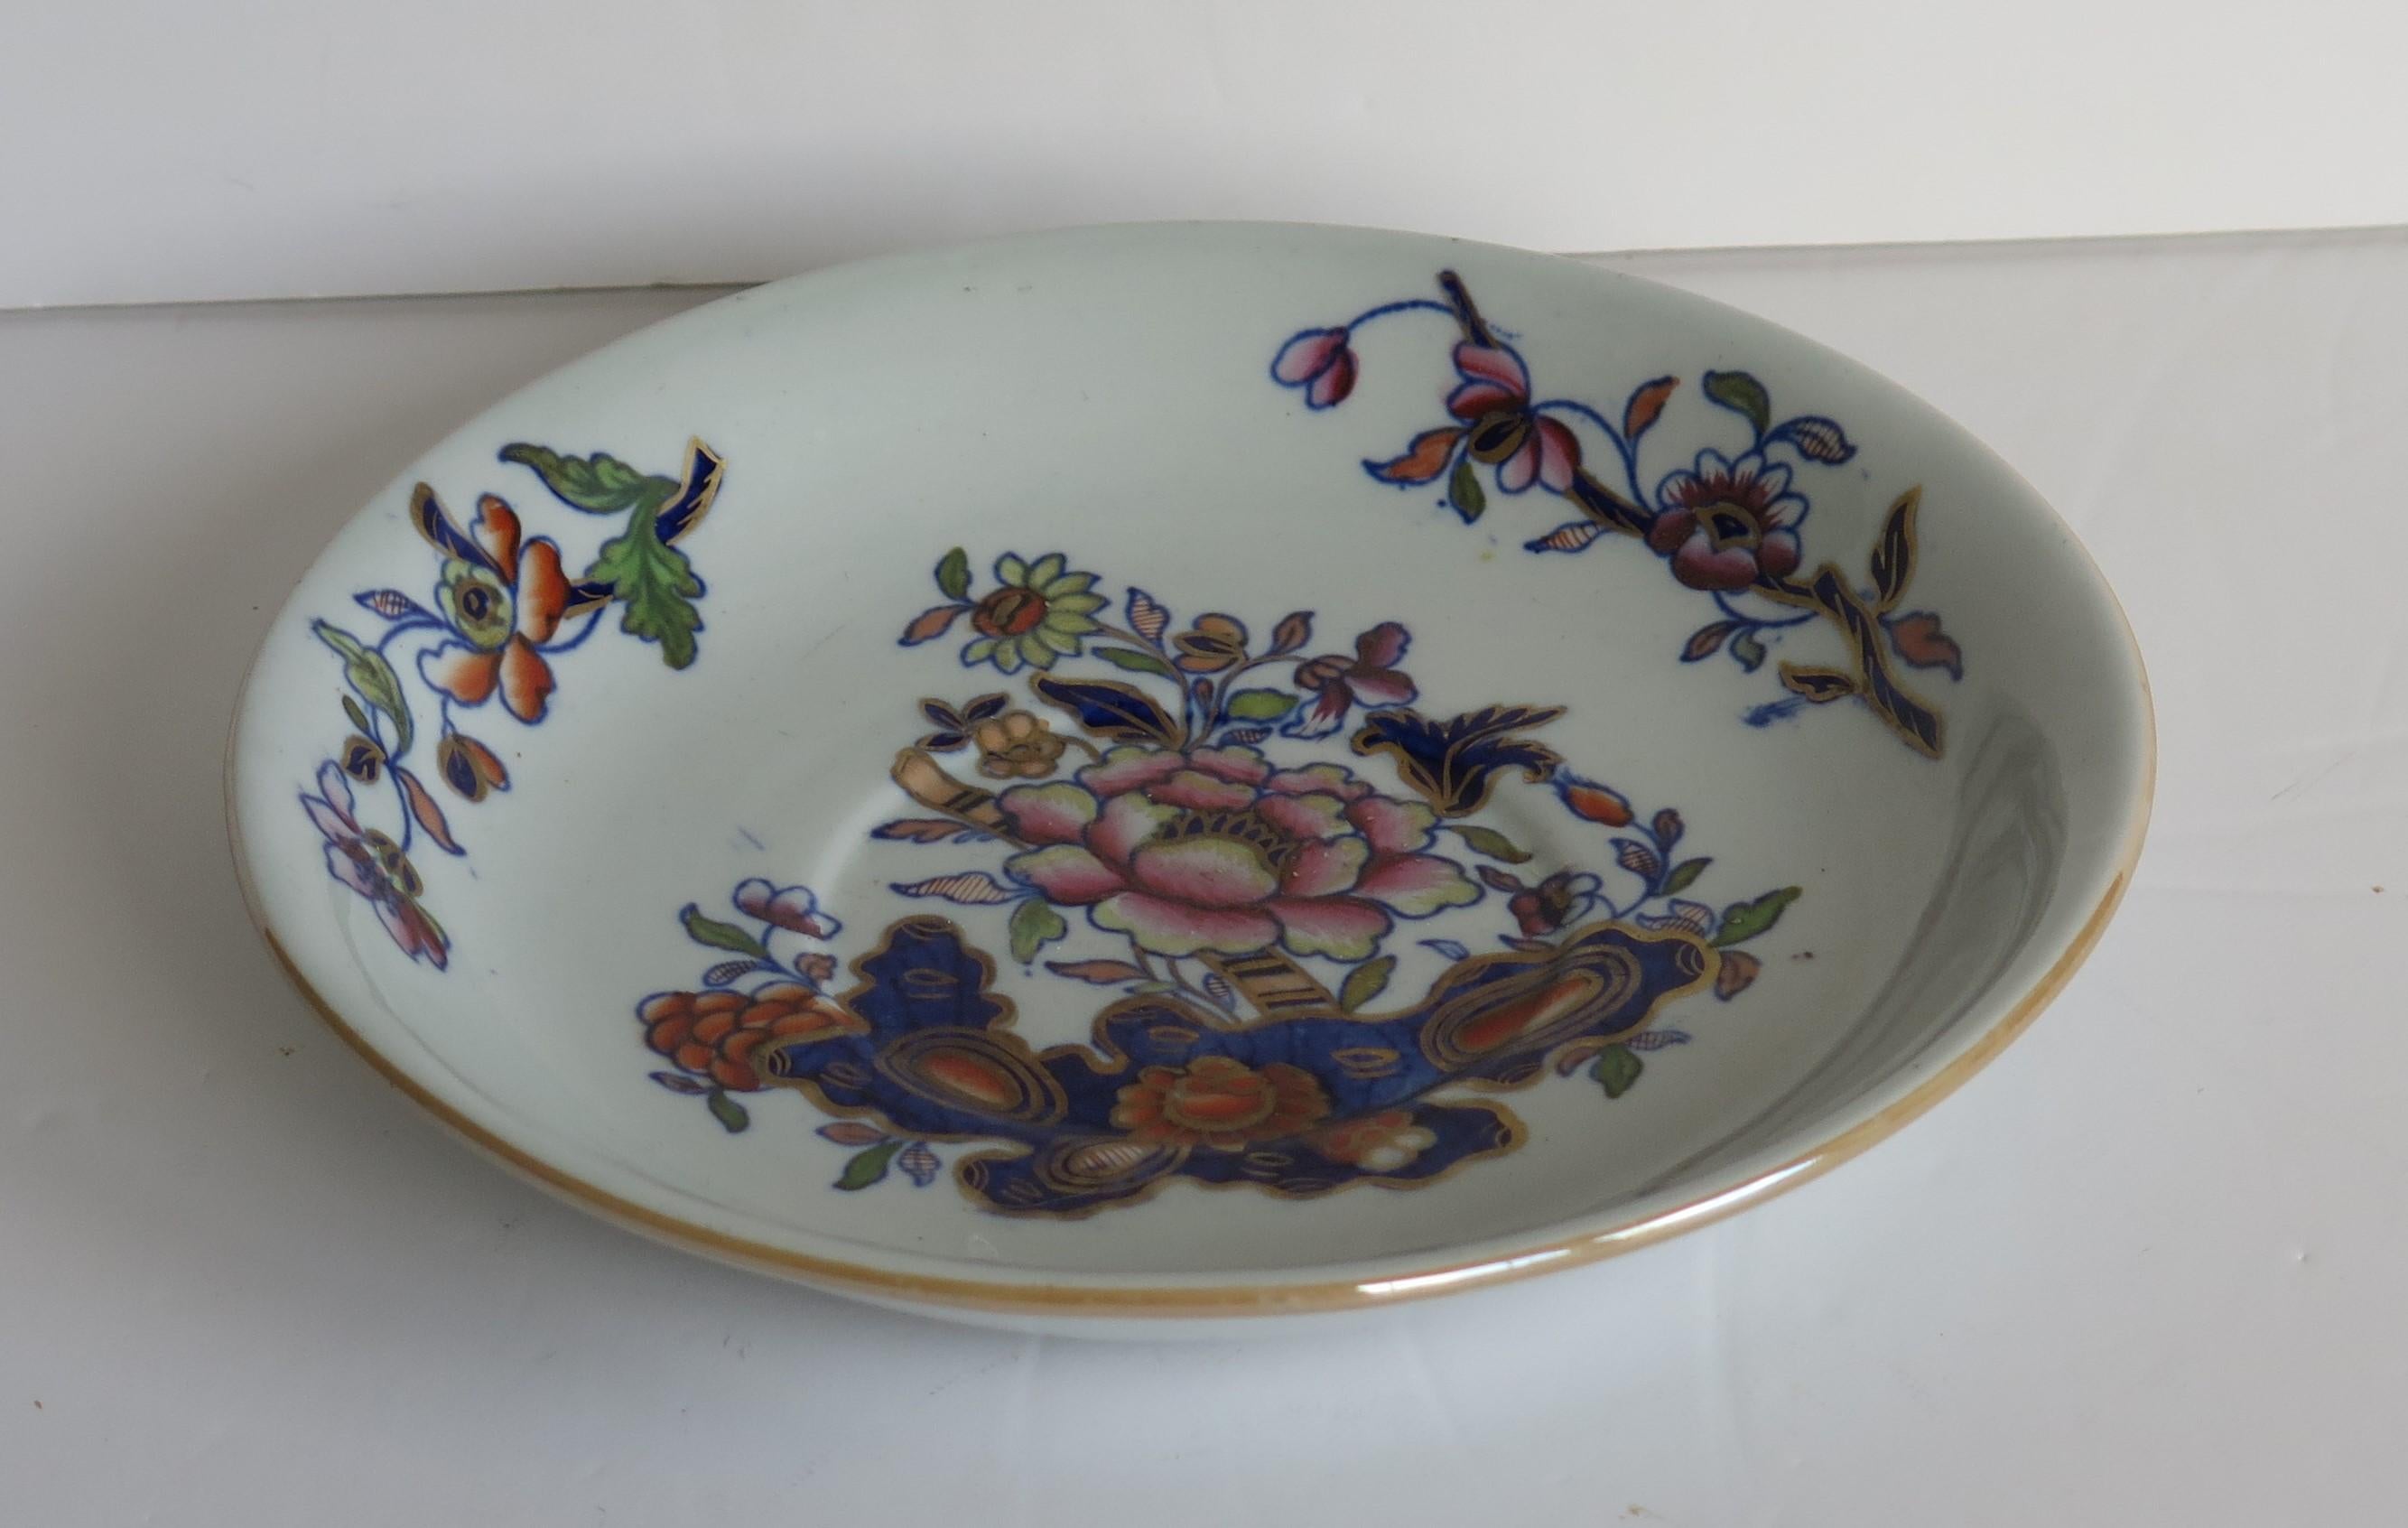 This is a good early hand painted ironstone (stone china) saucer dish or plate, made by William Davenport and Co., Longport, Staffordshire Potteries, England, George 111rd period, circa 1815.

The pattern is number 